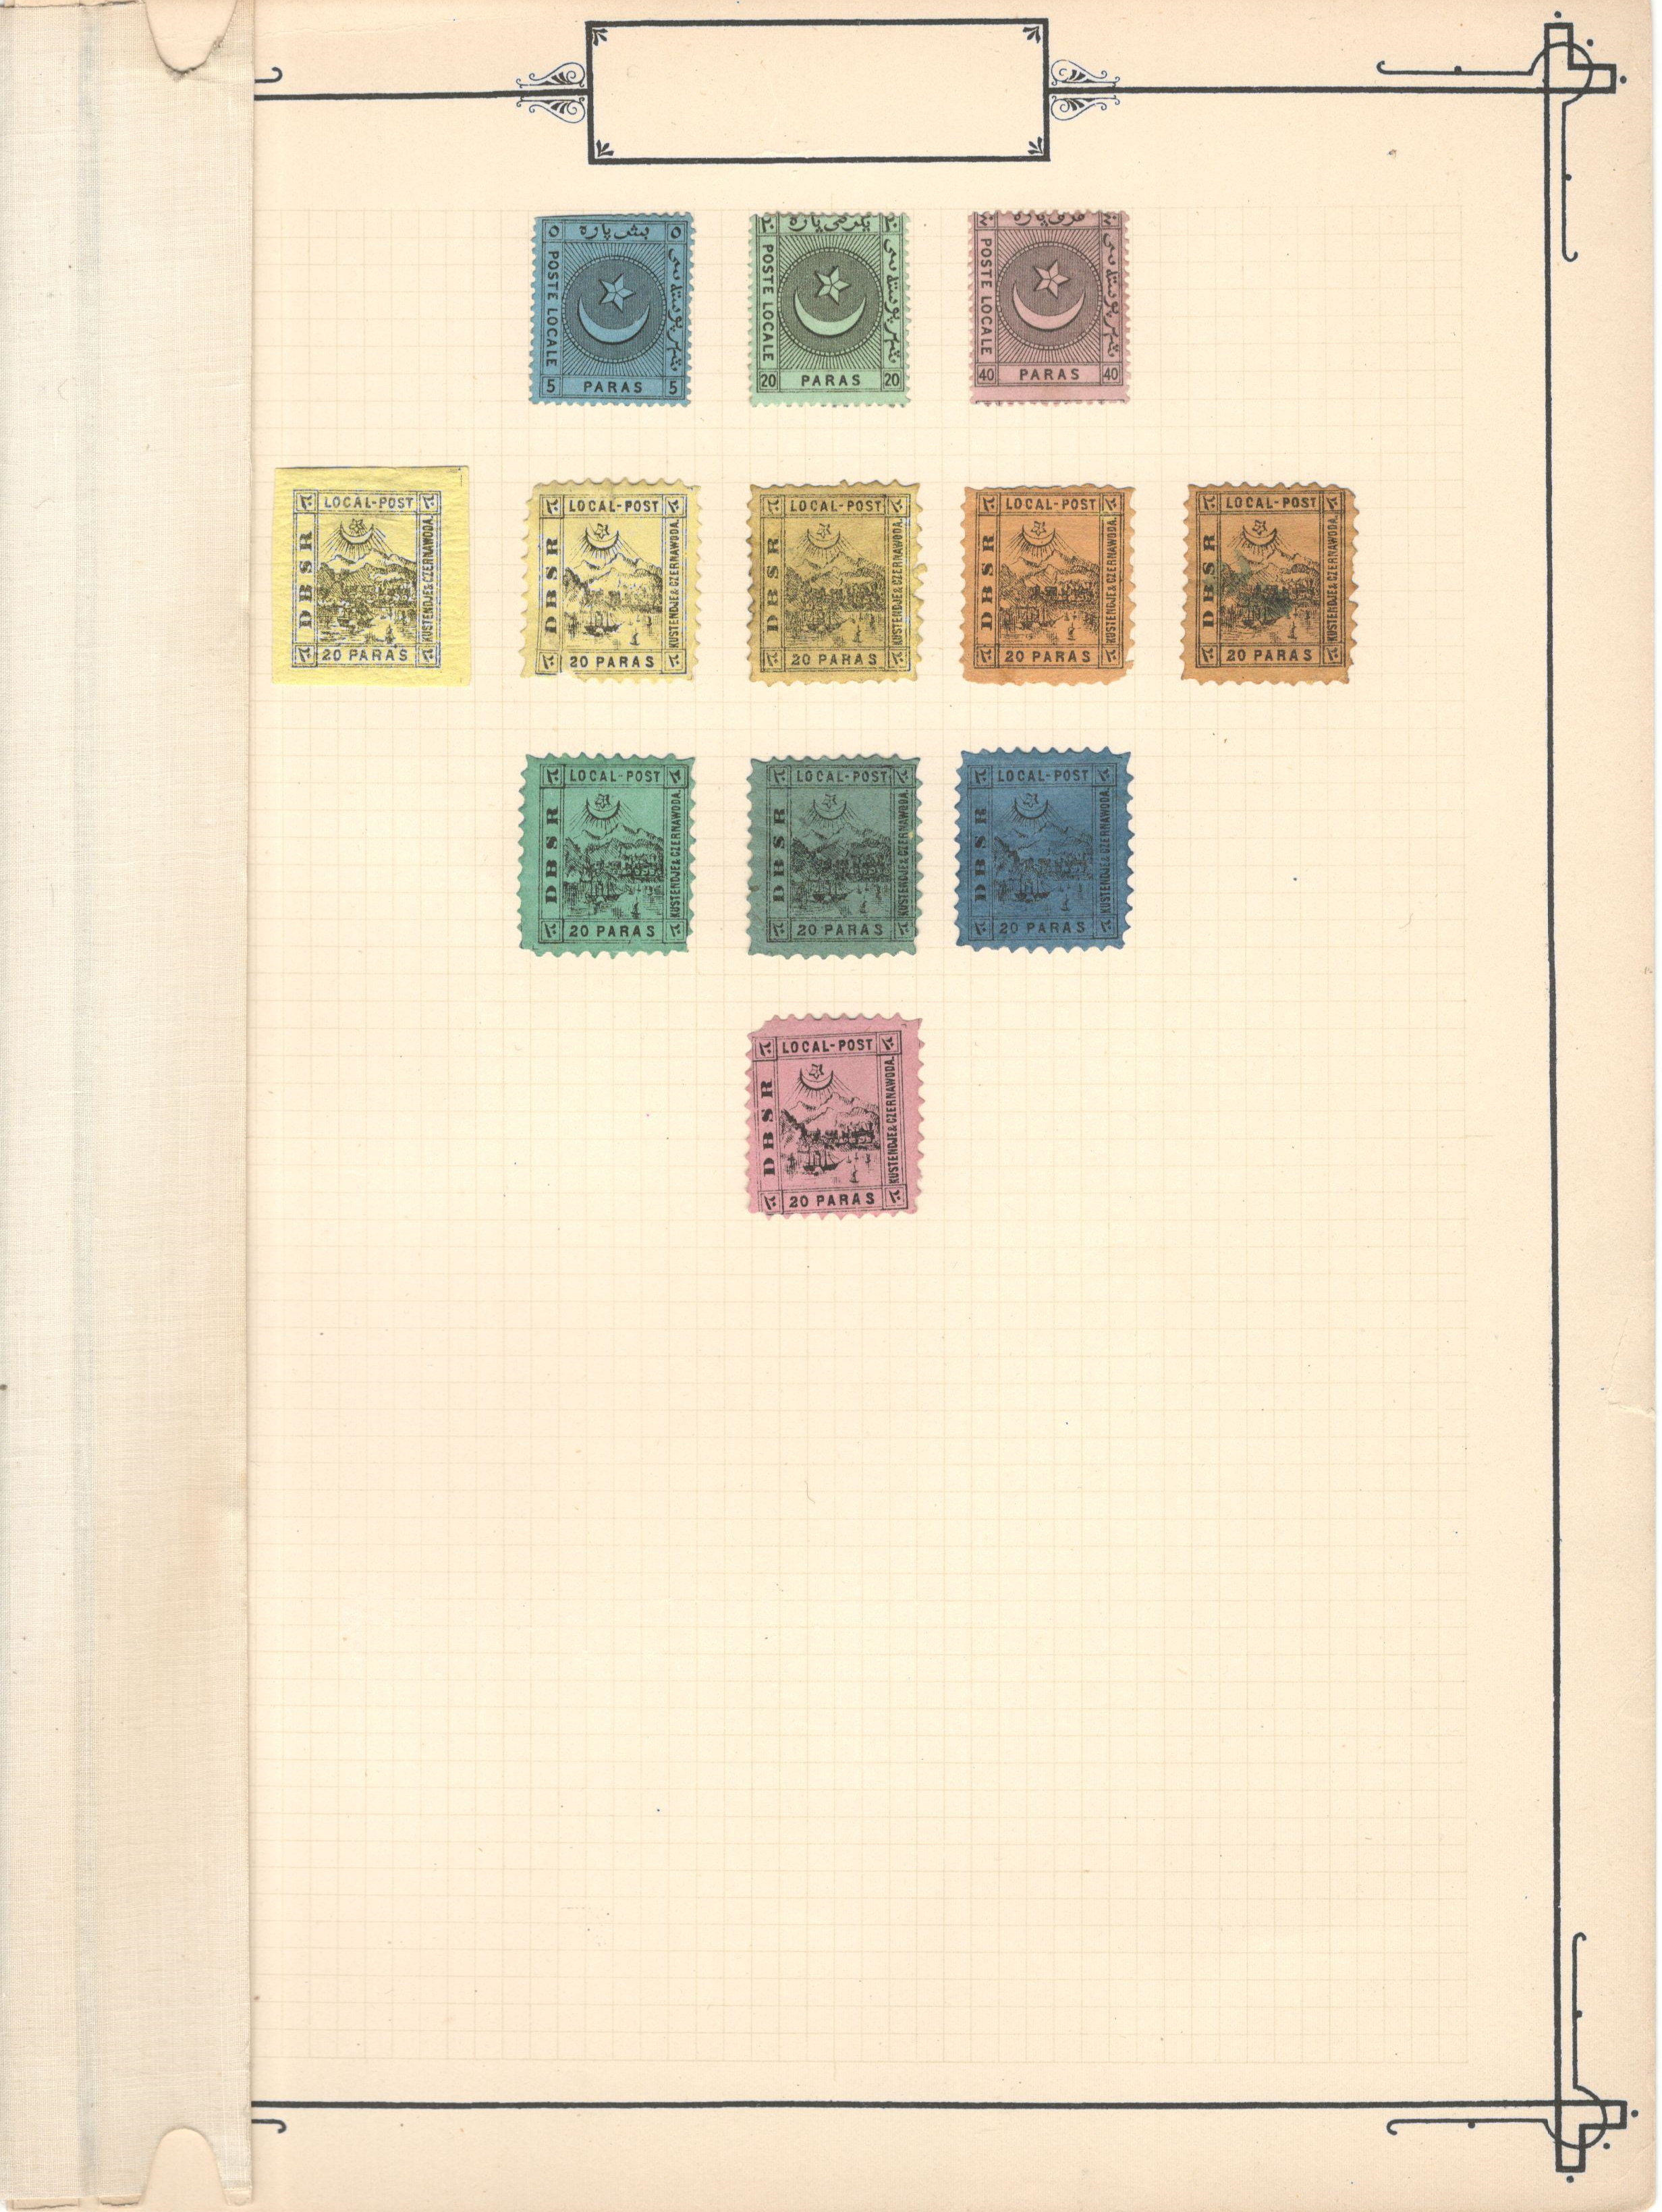 SELECTION OF ROMANIA 1867 DBSR DANUBE BLACK SEA RAILWAY TURKEY LOCAL POST STAMPS ON PAGE - Image 2 of 2